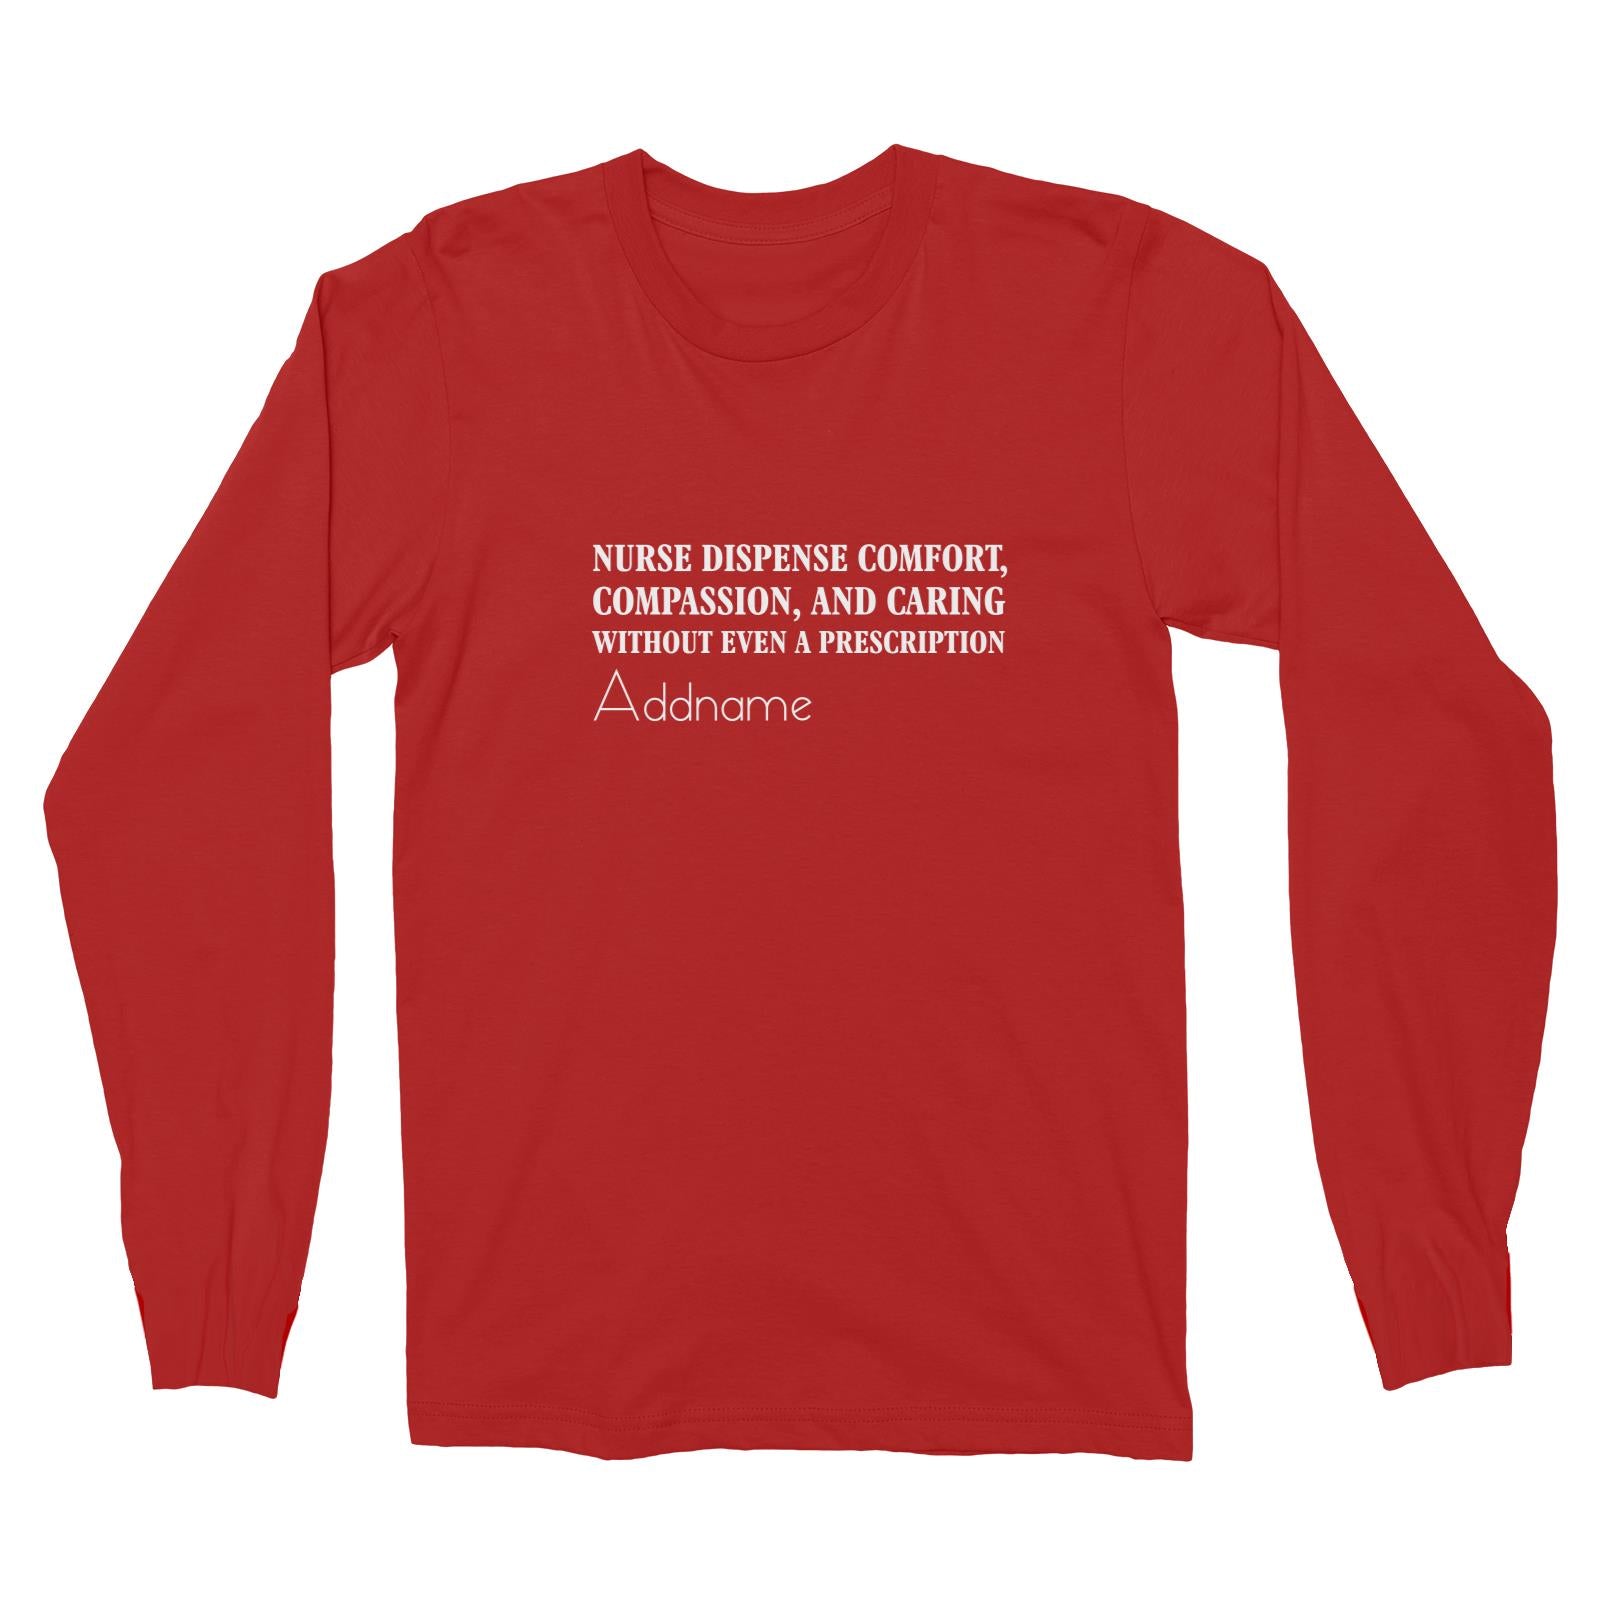 Nurse Dispense Comfort, Compassion, And Caring Without Even A Prescription Long Sleeve Unisex T-Shirt